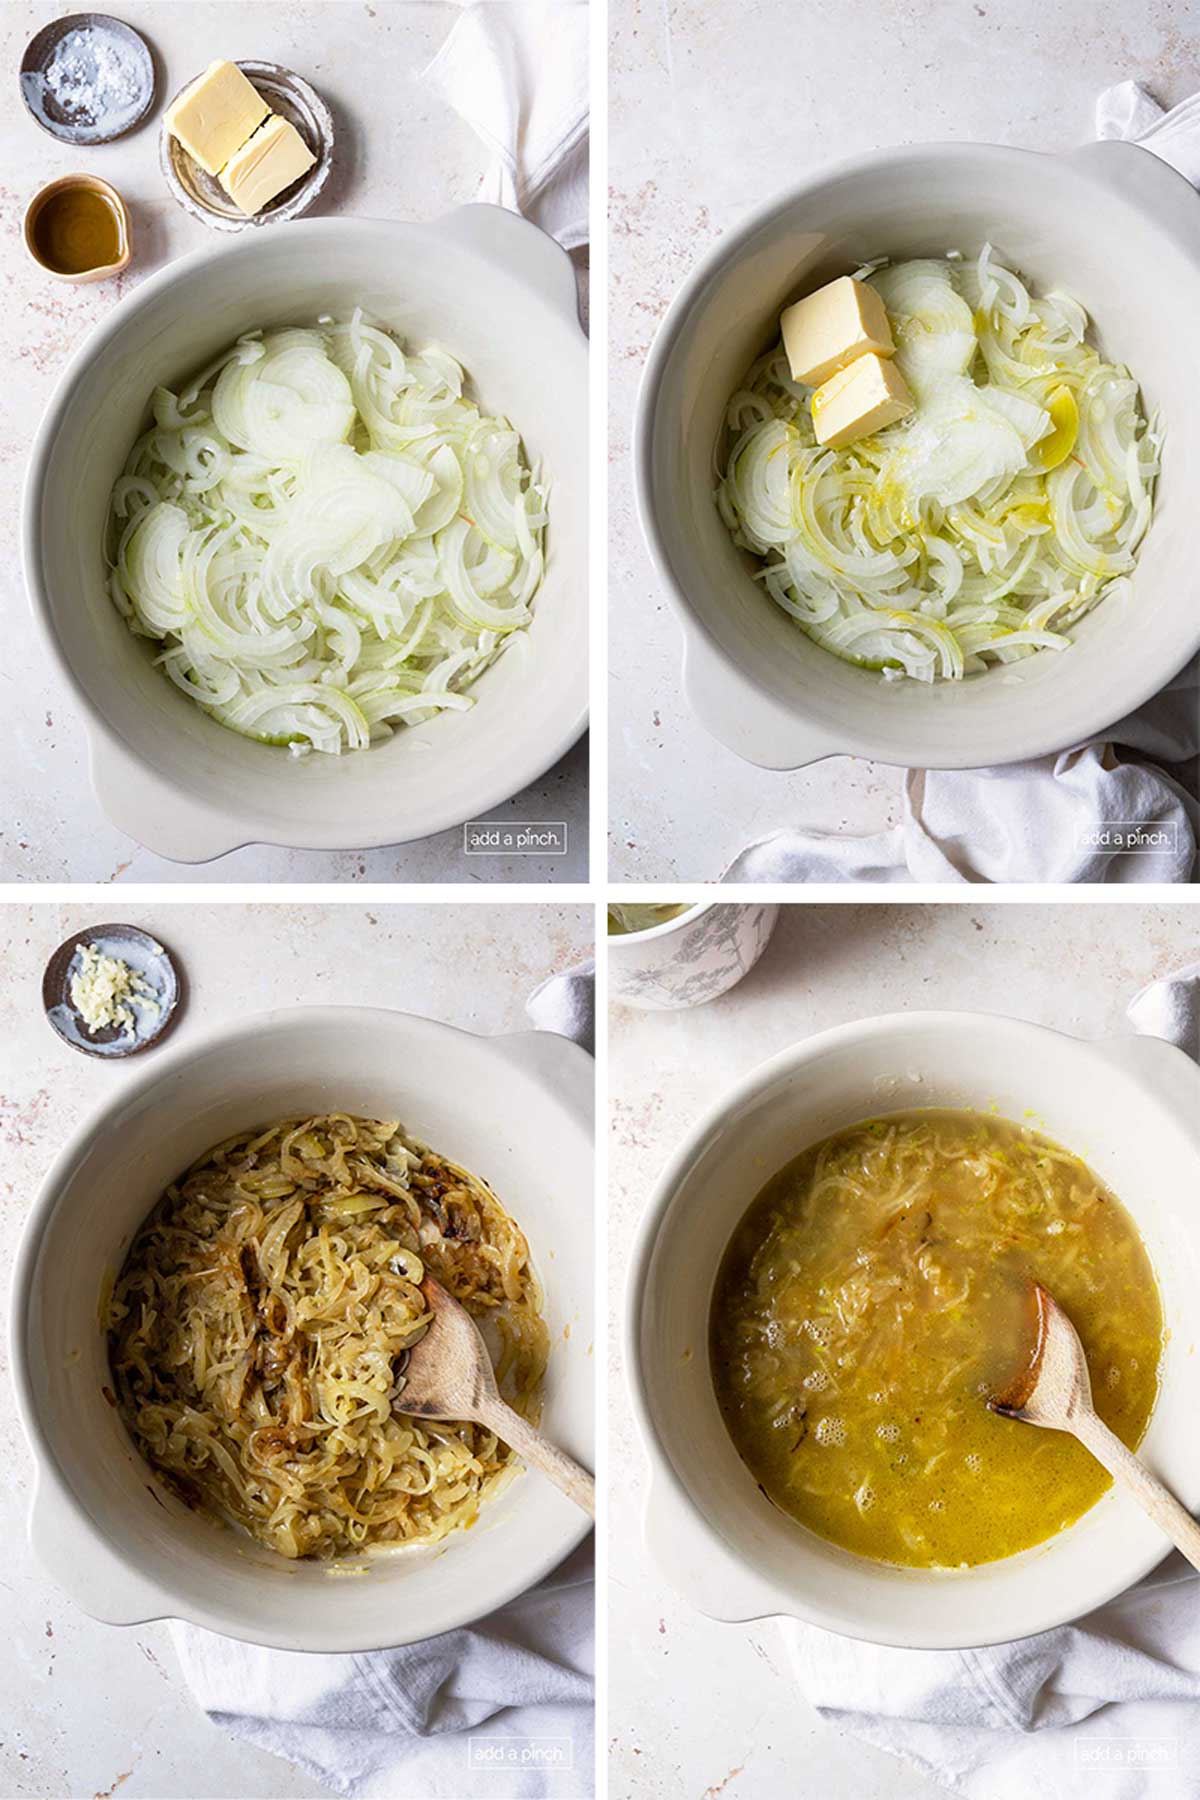 Four photos of French onion soup being cooked, with top left photo showing White Dutch oven filled with thinly sliced onions, top right photo shows butter added to the onions, bottom left photo shows onions have caramelized and cooking, bottom right showed broth has been added and soup is cooking. 